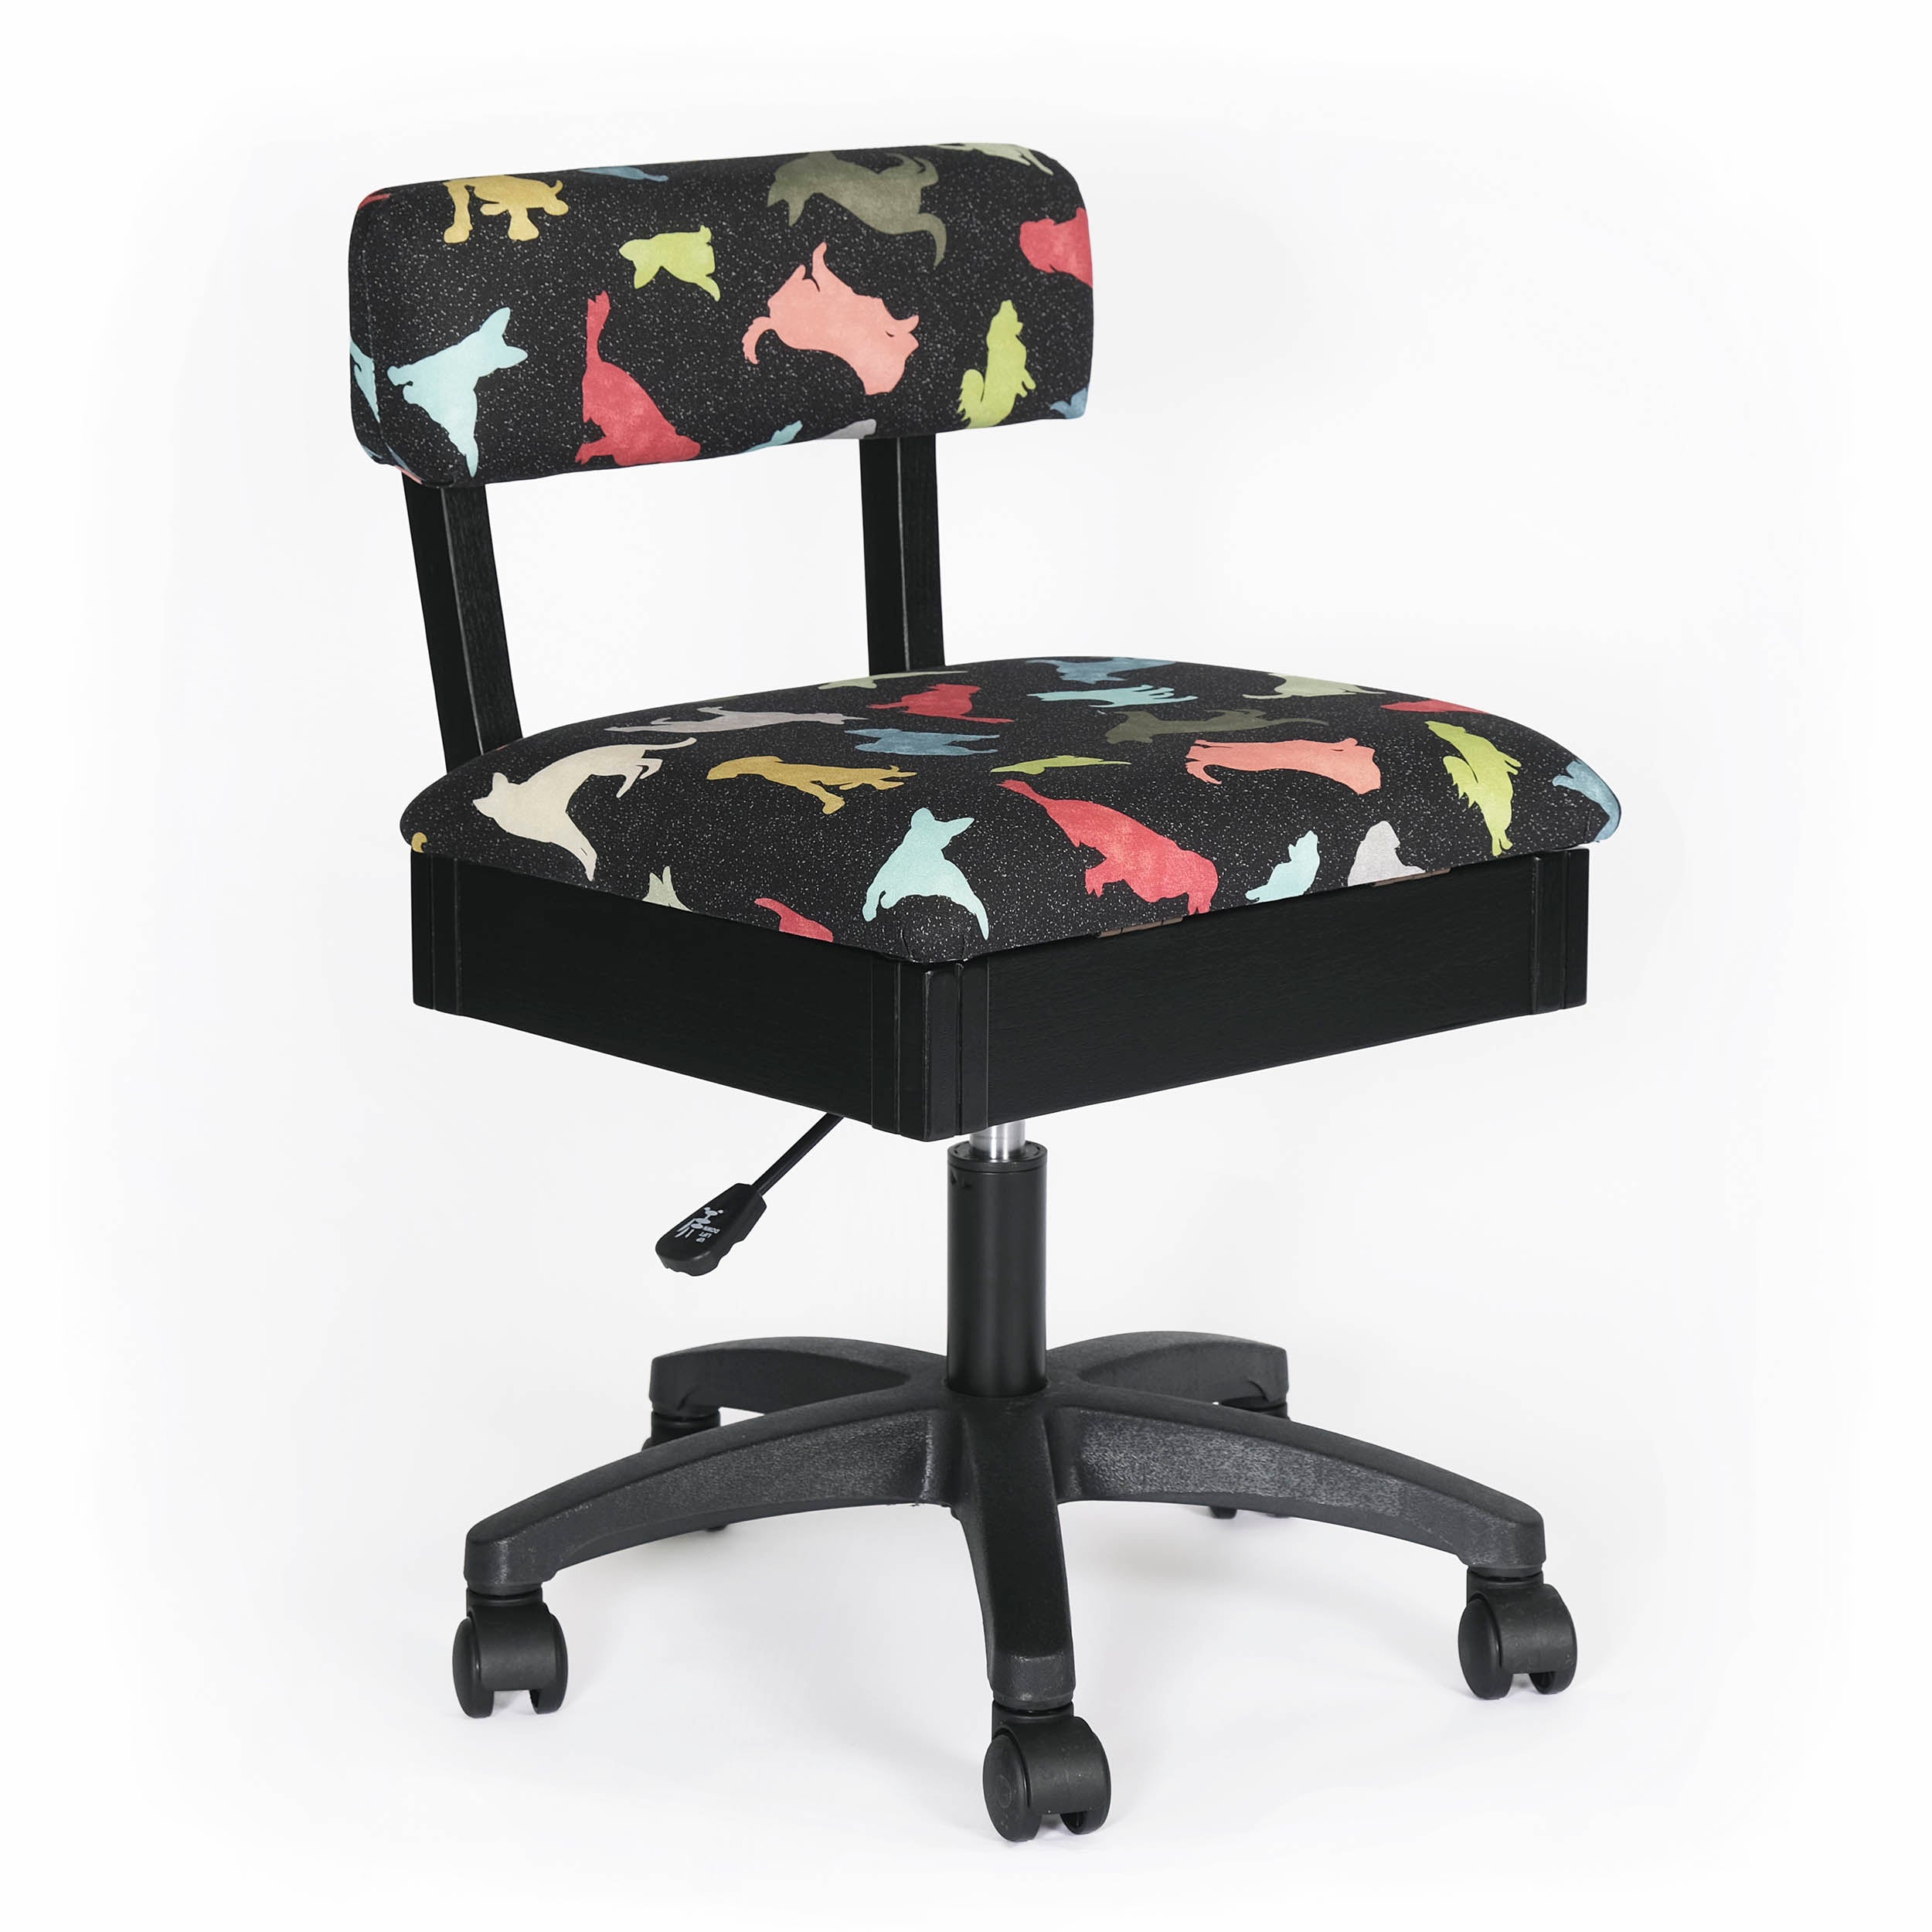 Arrow Height Adjustable Hydraulic Sewing Chair - Good Dog-Arrow Classic Sewing Furniture-My Favorite Quilt Store